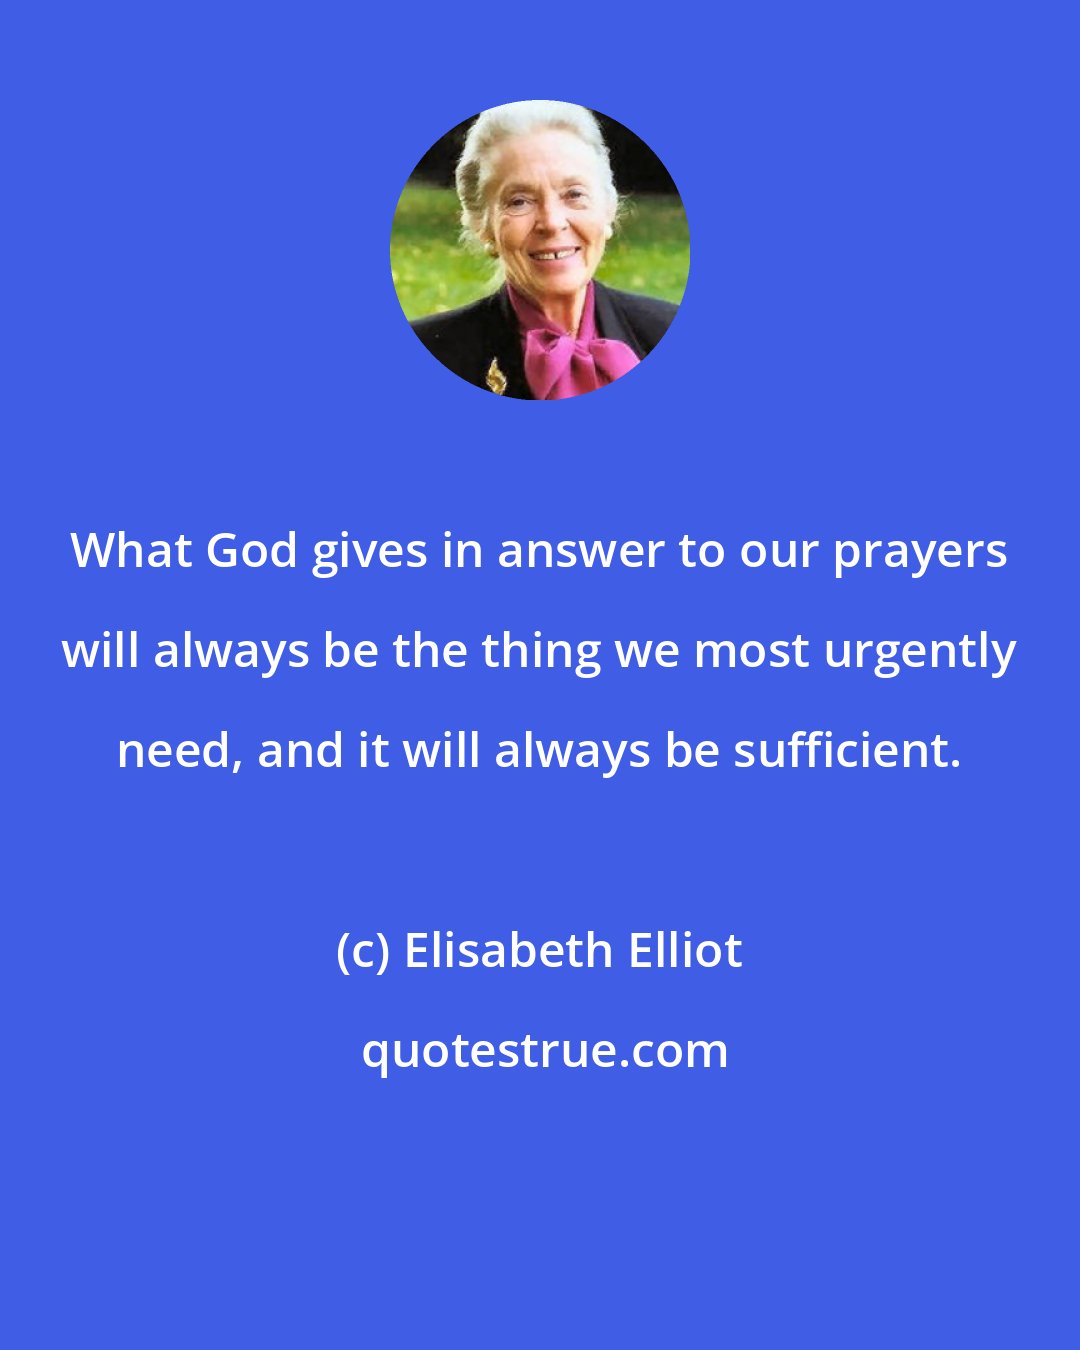 Elisabeth Elliot: What God gives in answer to our prayers will always be the thing we most urgently need, and it will always be sufficient.